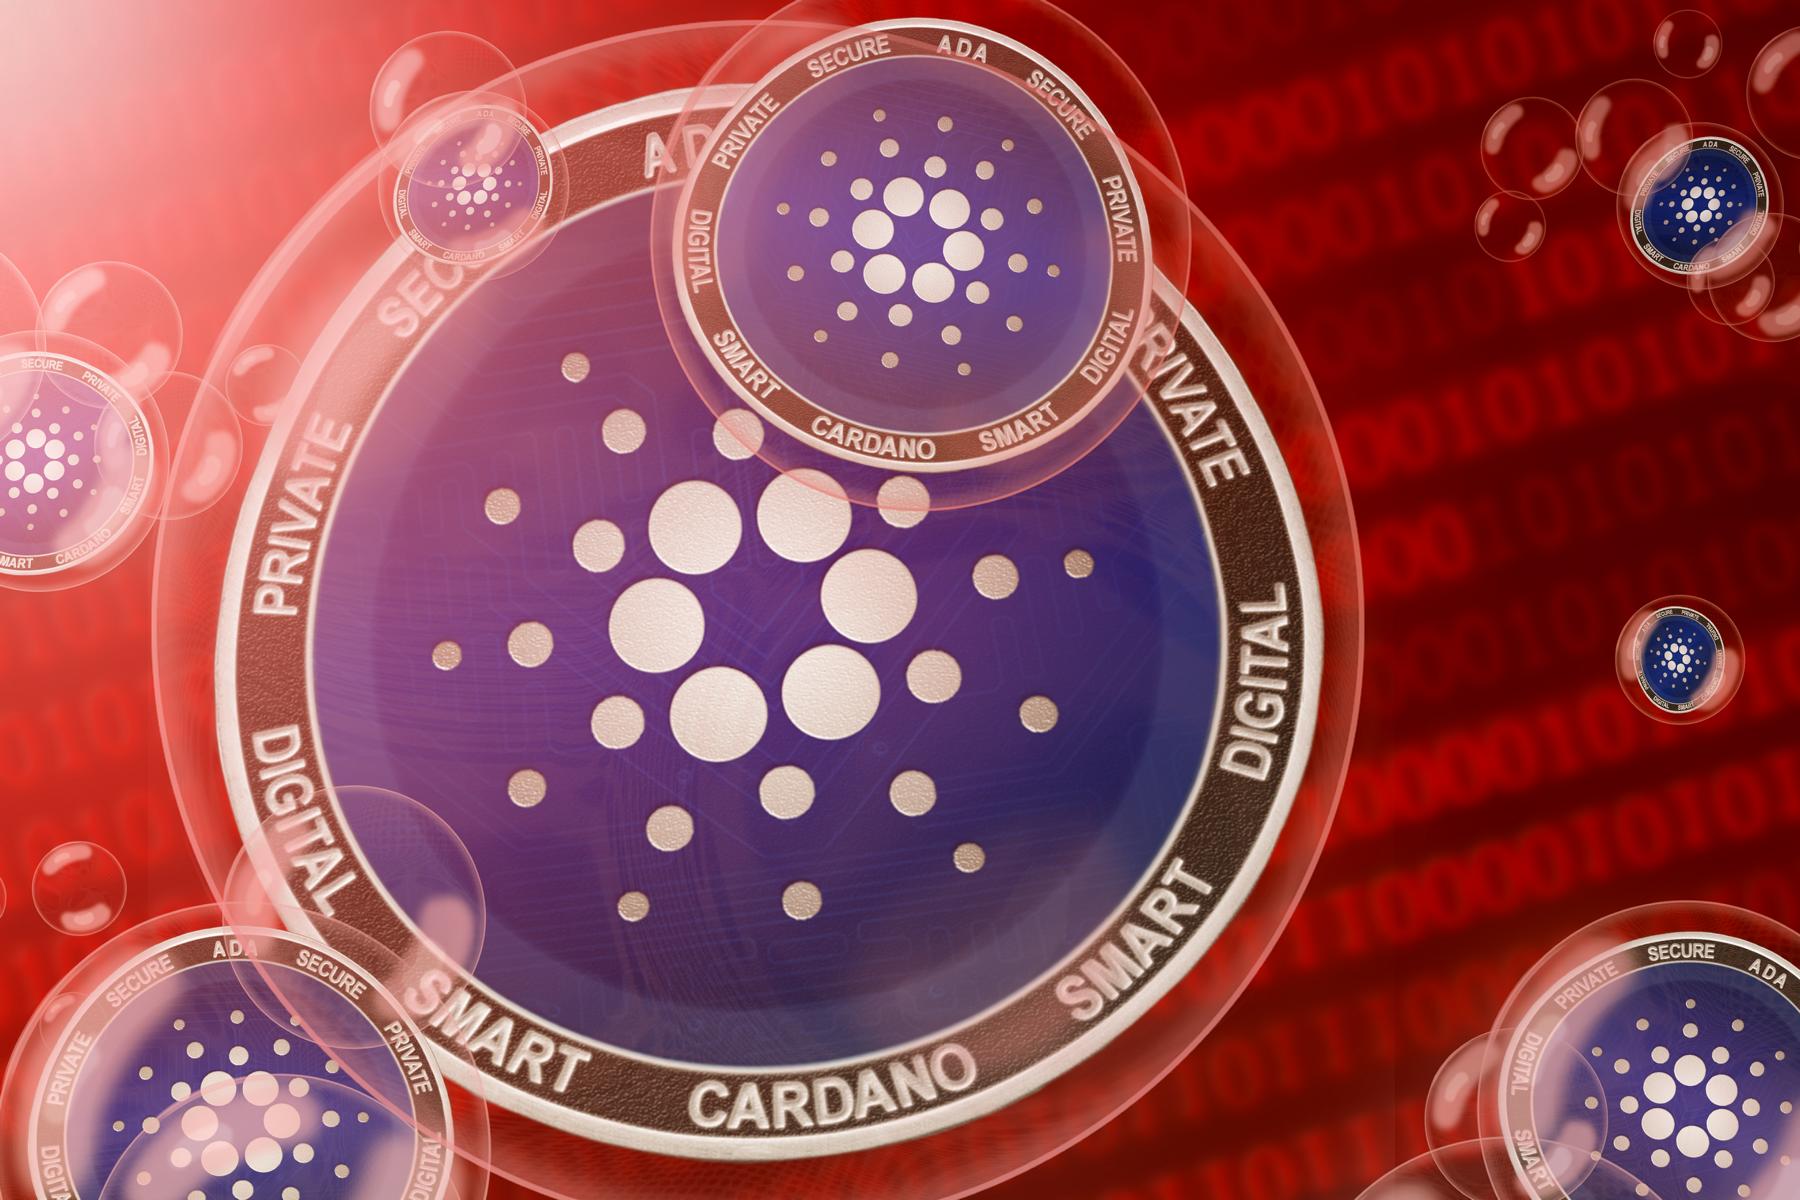 Will the Trump vs. Biden Election Rely on Cardano (ADA)? CEO Reveals US States Exploring Blockchain Voting